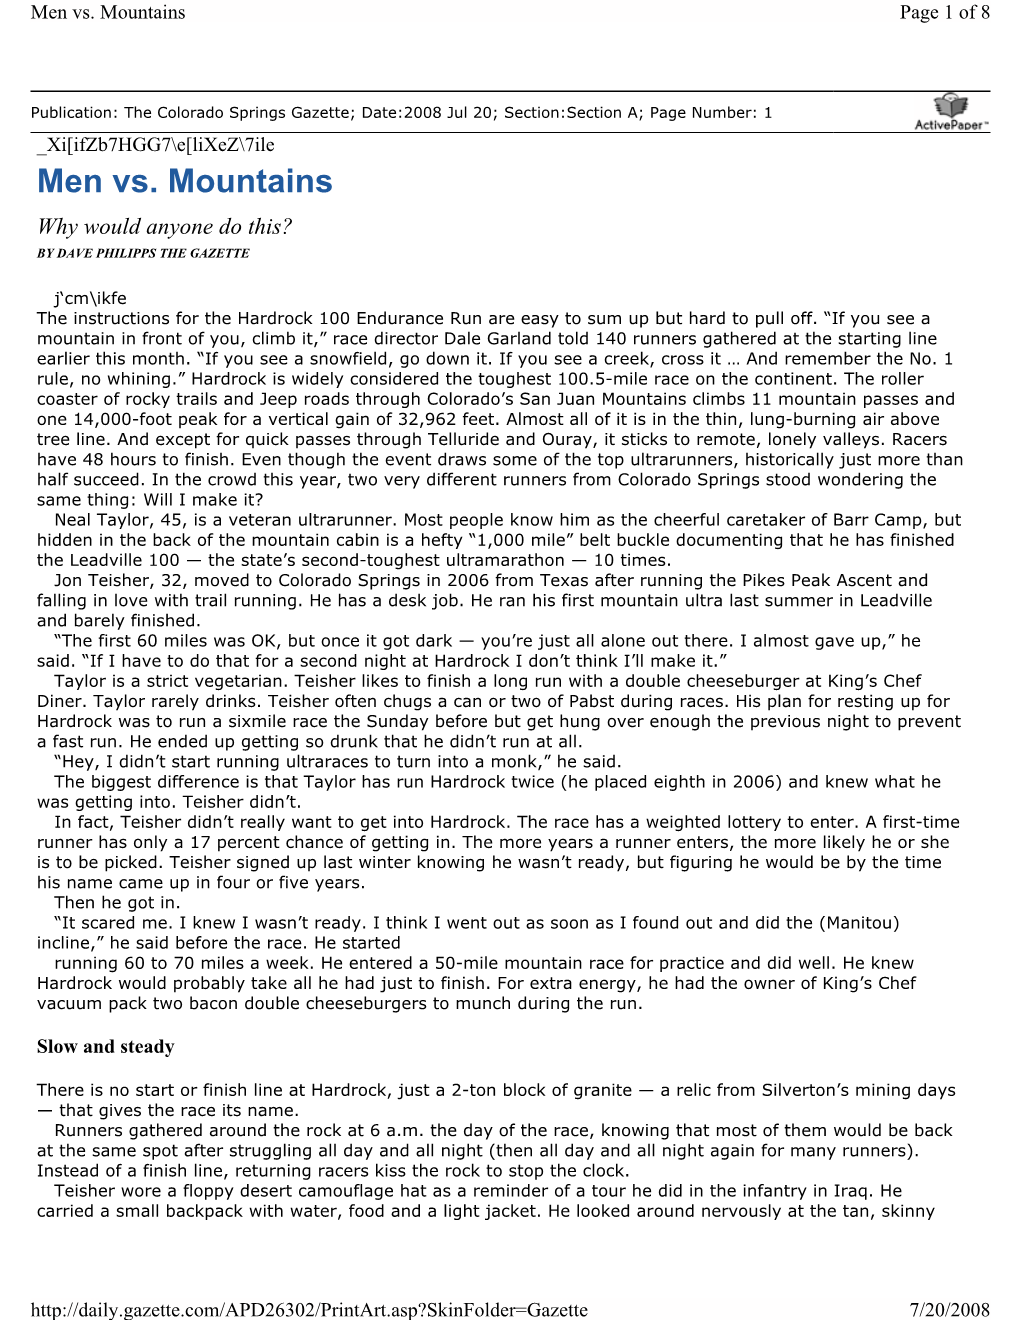 Men Vs. Mountains Page 1 of 8